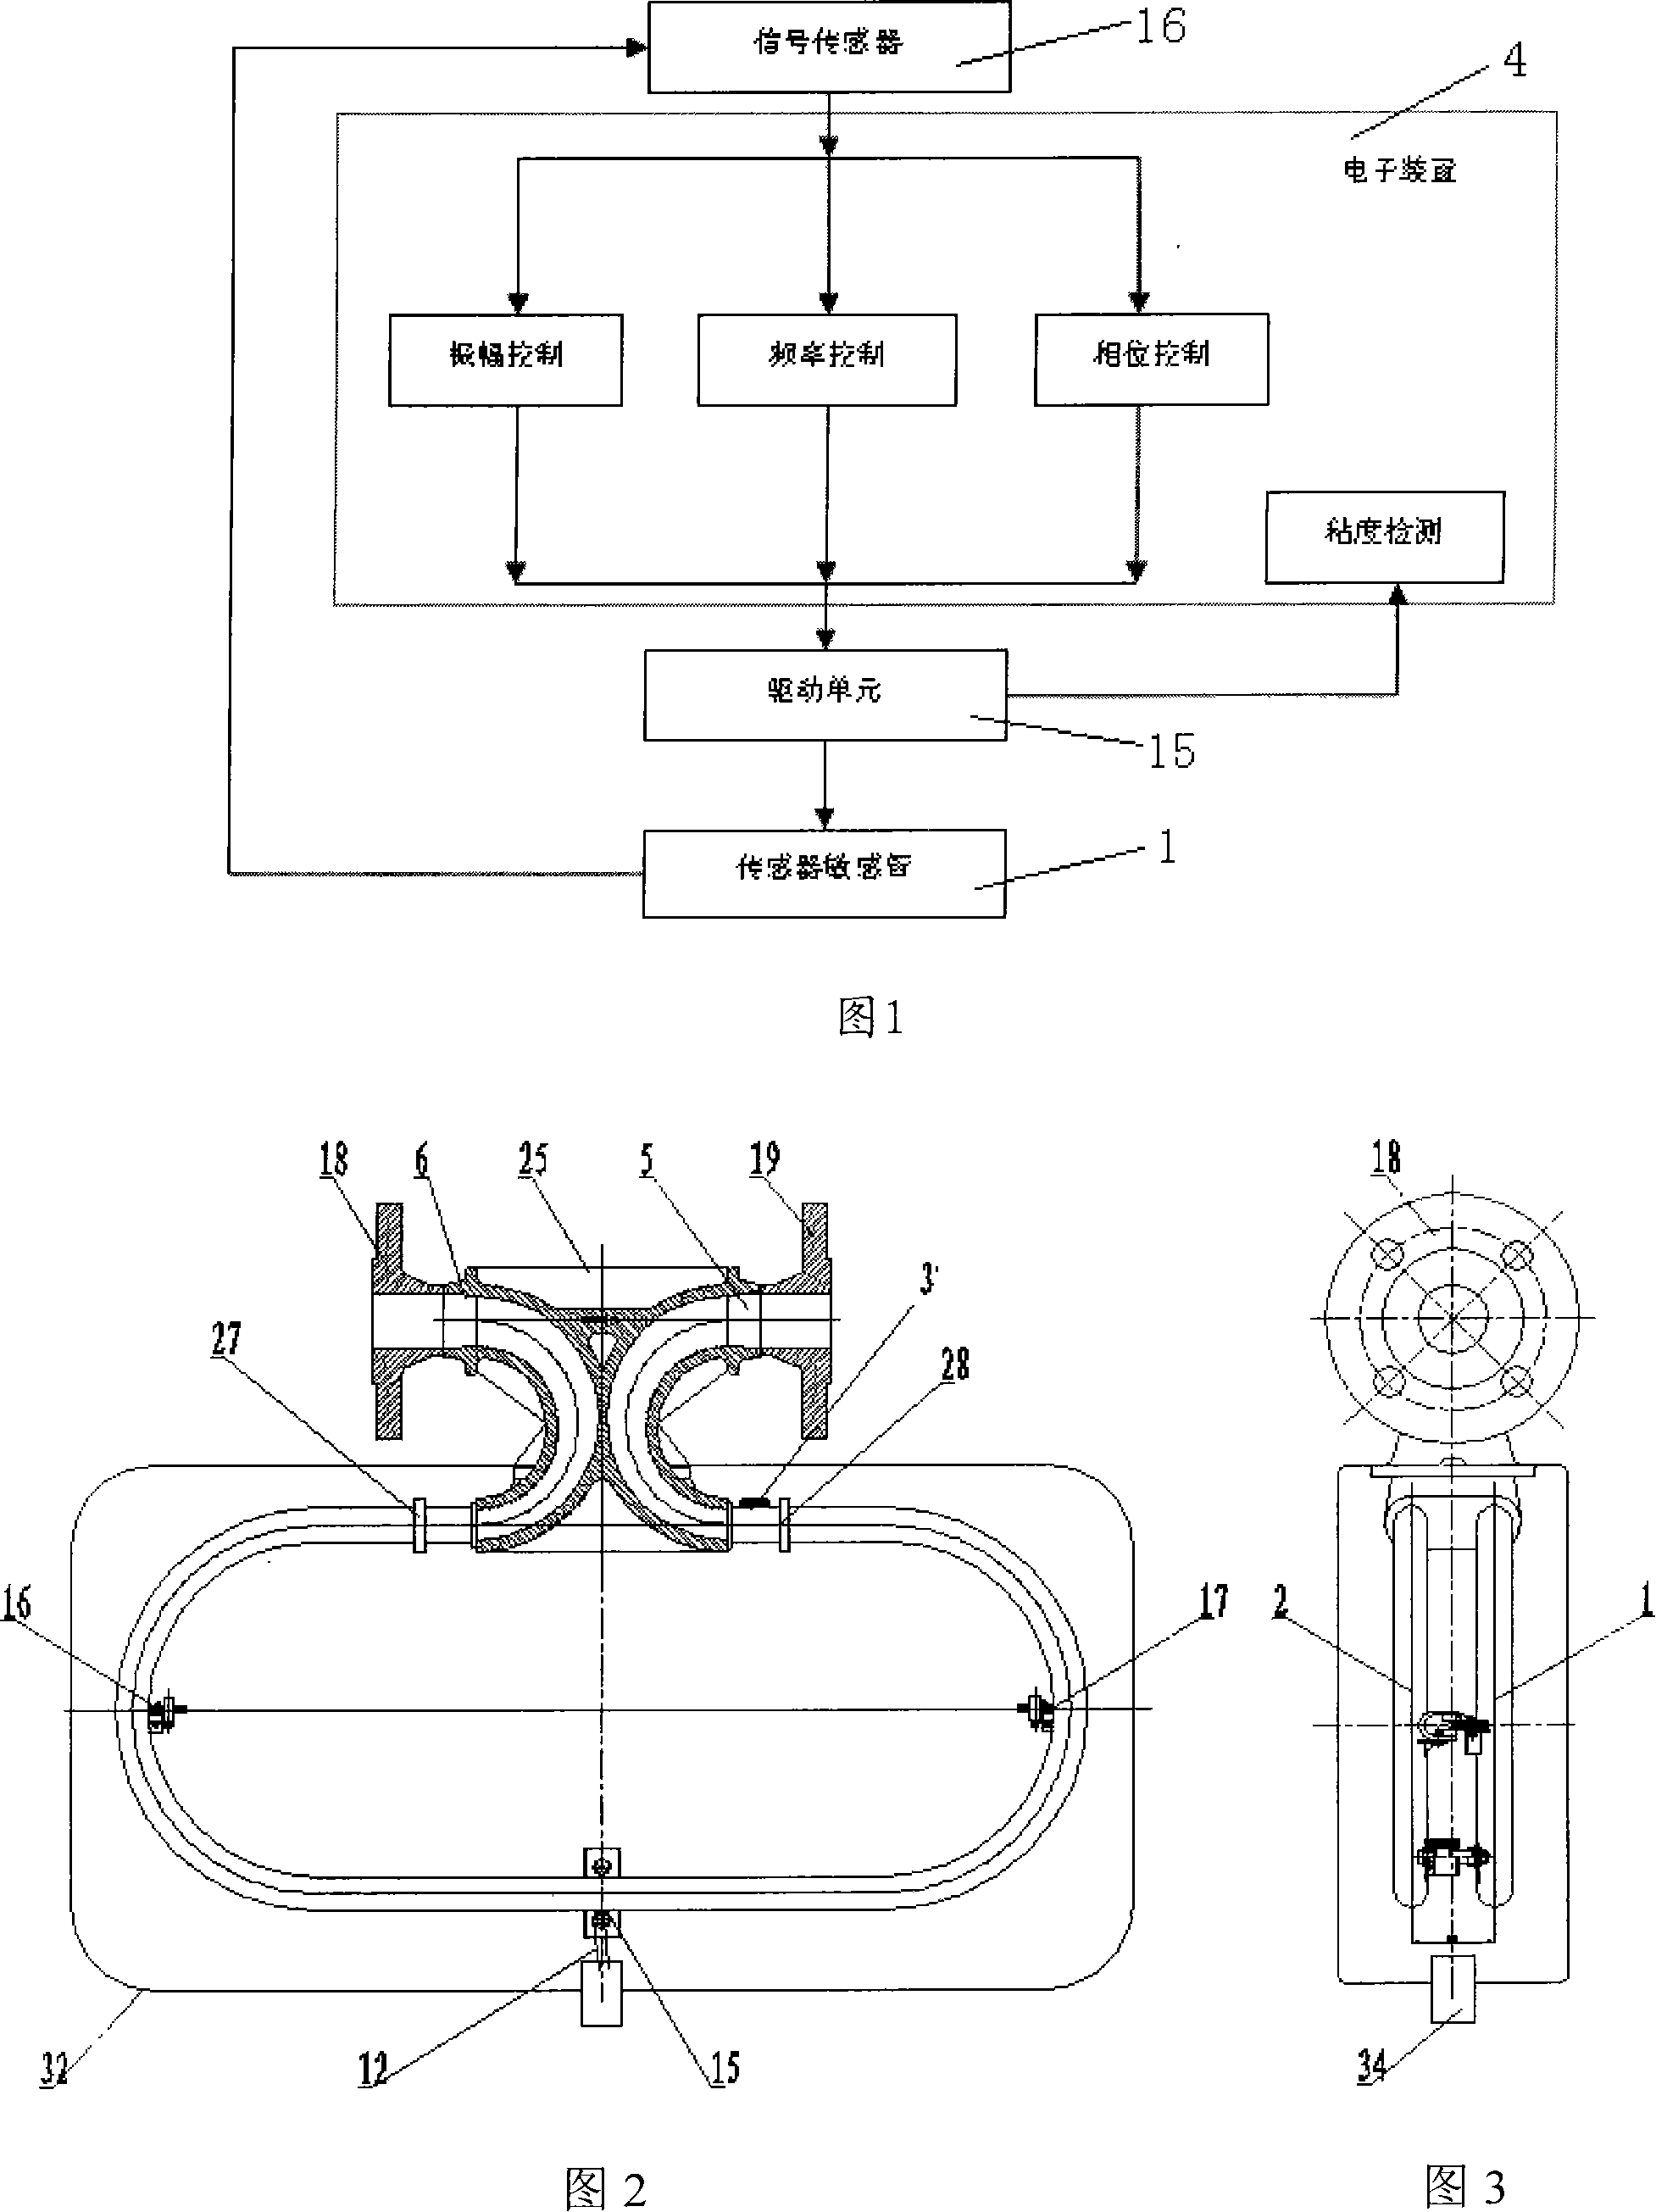 Method and device for detecting viscosity of fluid passing pipe